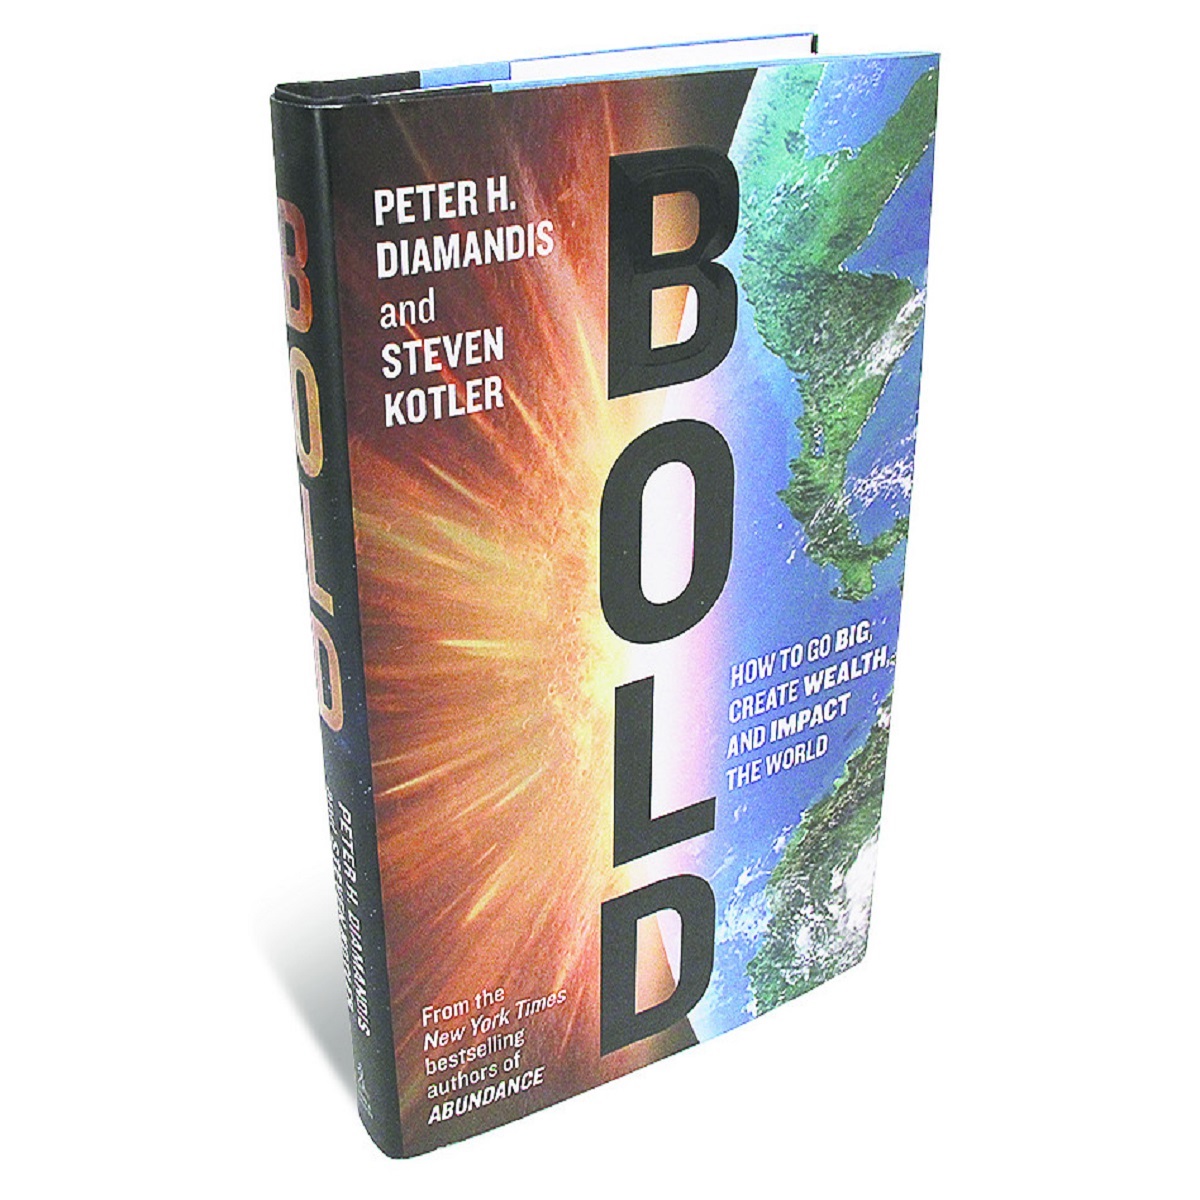 https://tarbiyahbooksplus.com/shop/business-economics-law-and-finance/bold-by-peter-diamandis/